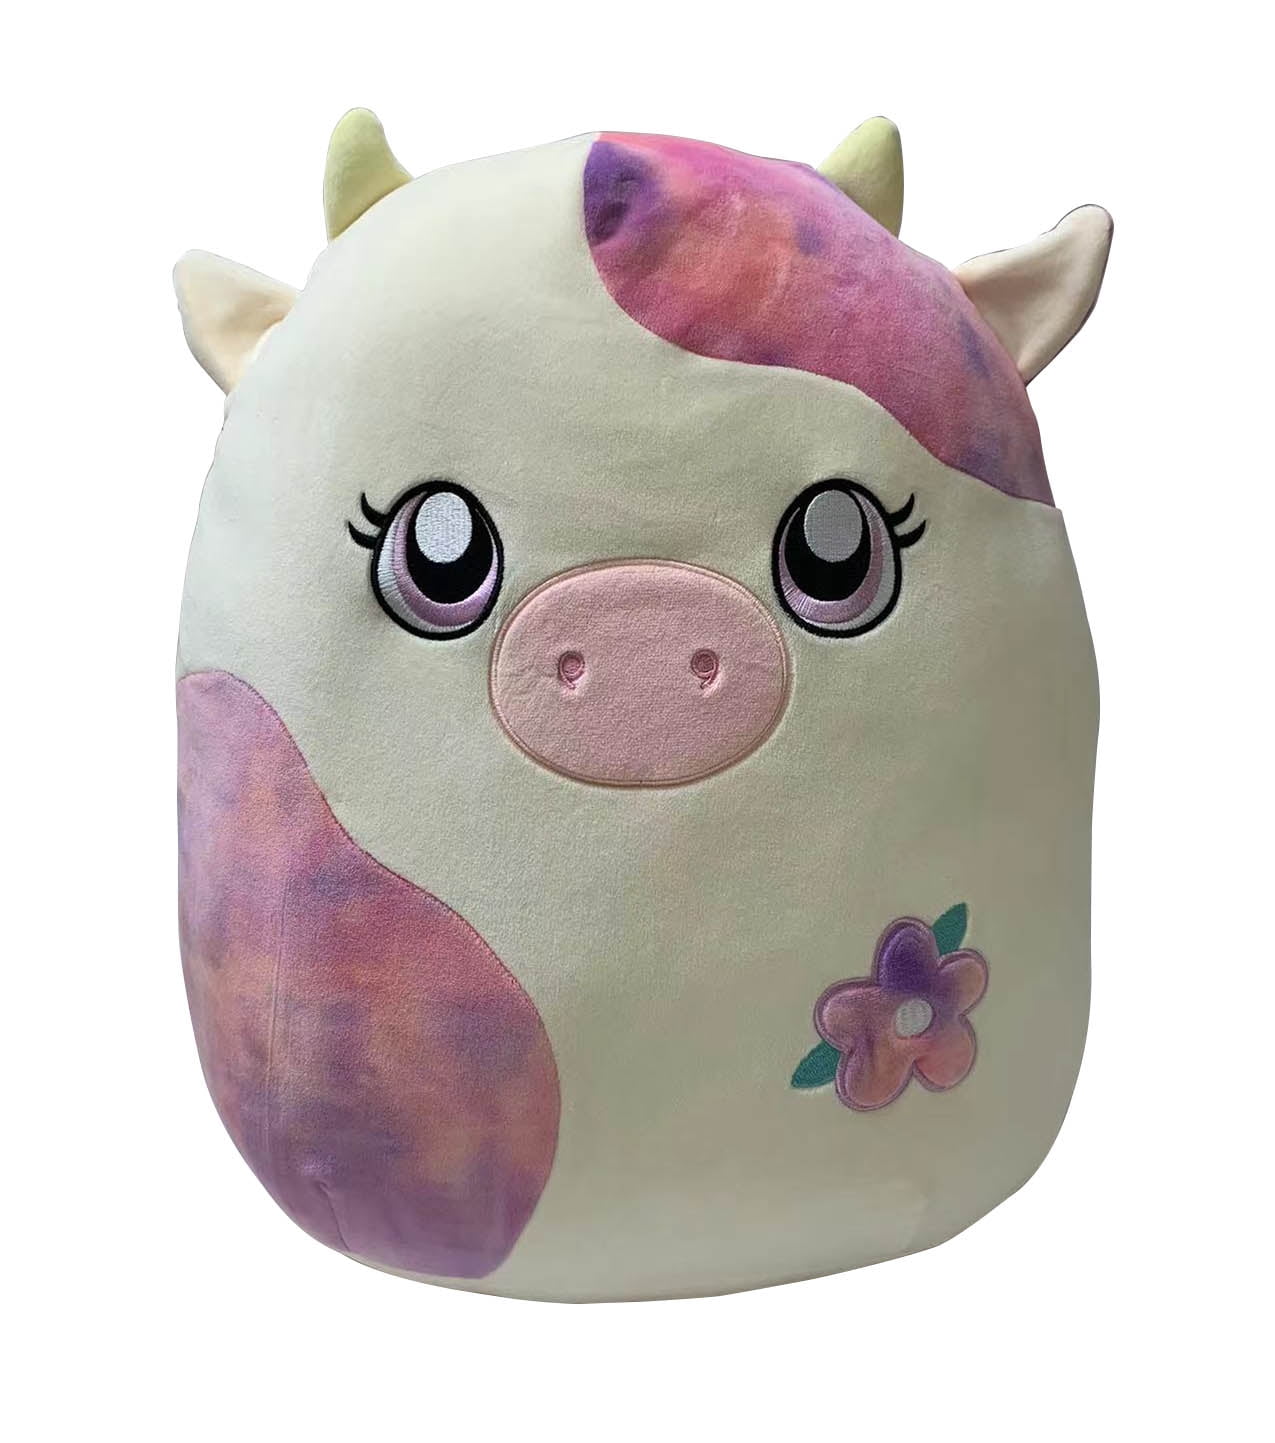 Buy 1 Get 1 25% Off Add 2 to Cart Kellytoy Squishmallow 5" 7" 8" 11" 3" Clip 